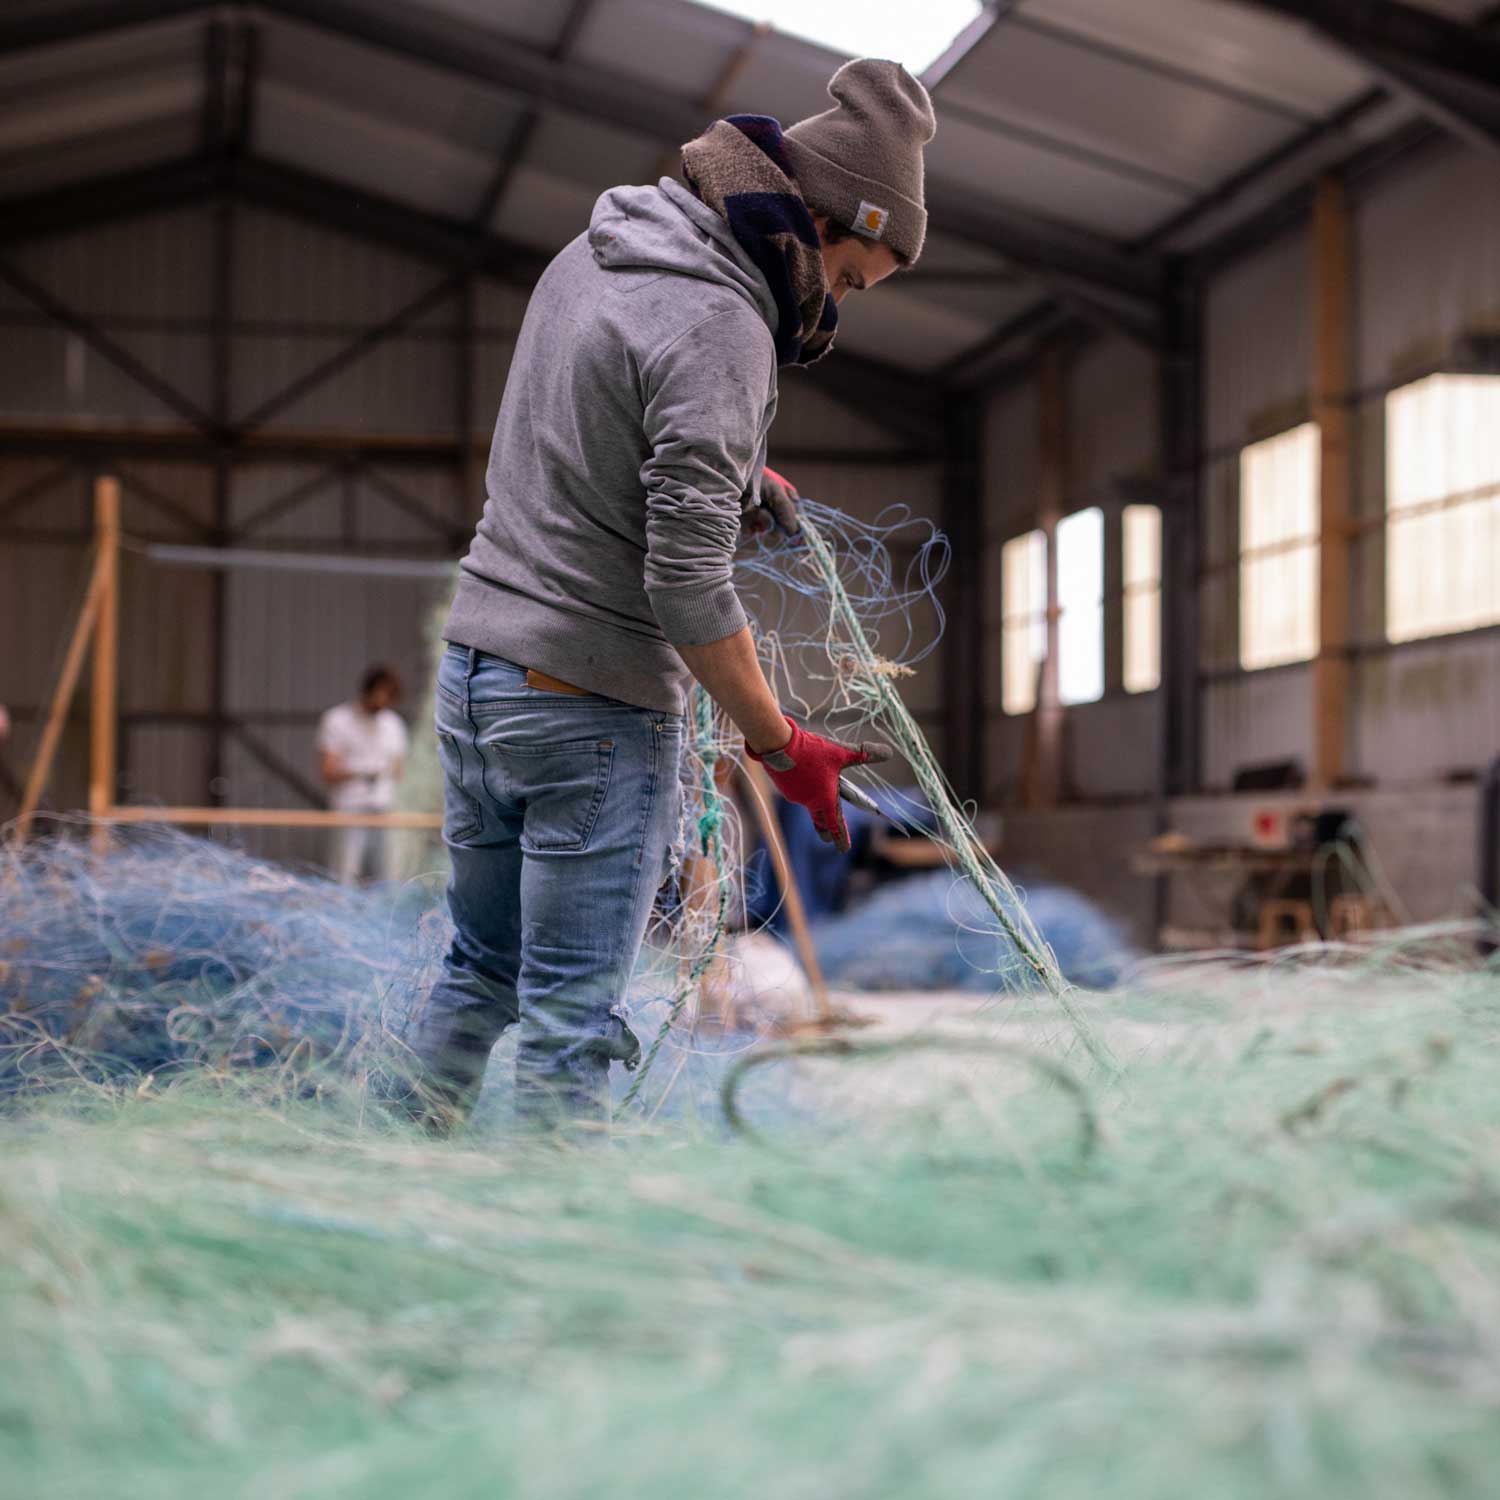 Before the transformation of the nets into a usable fabric, Fil & Fab classifies the nets by hand. More than 640,000 tons of discarded fishing nets float in the ocean, destroying aquatic ecosystems.